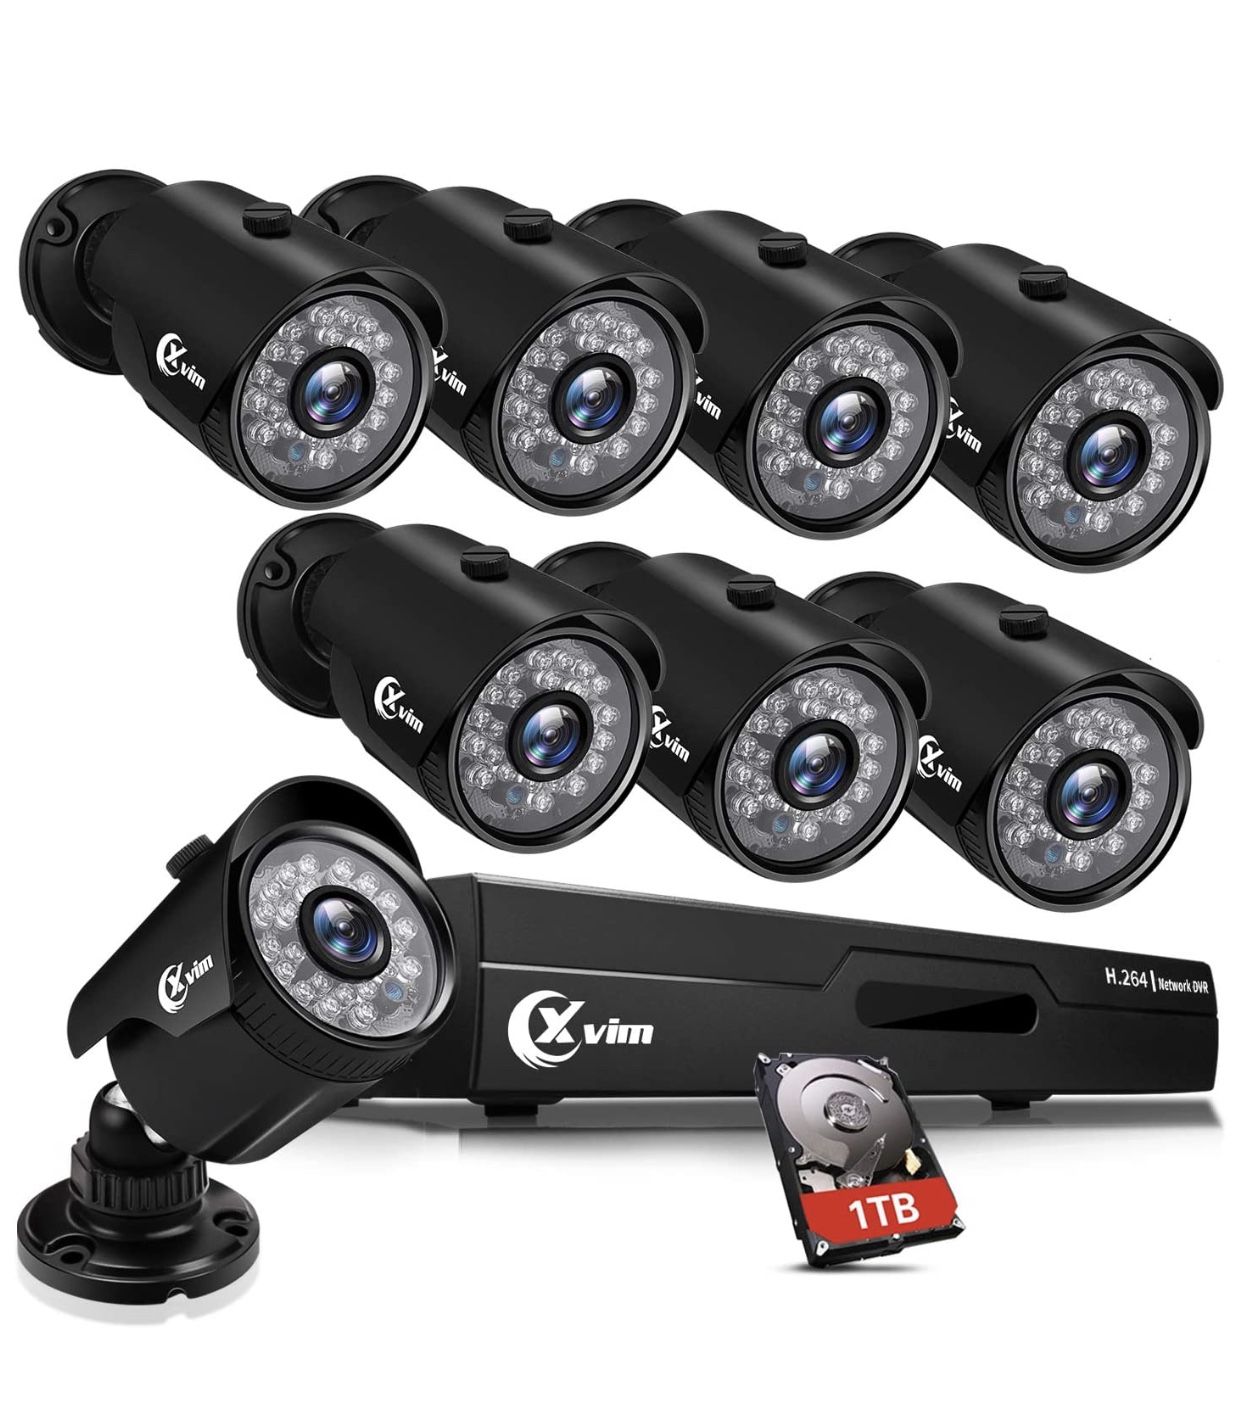 8channel HD security camera 1TB